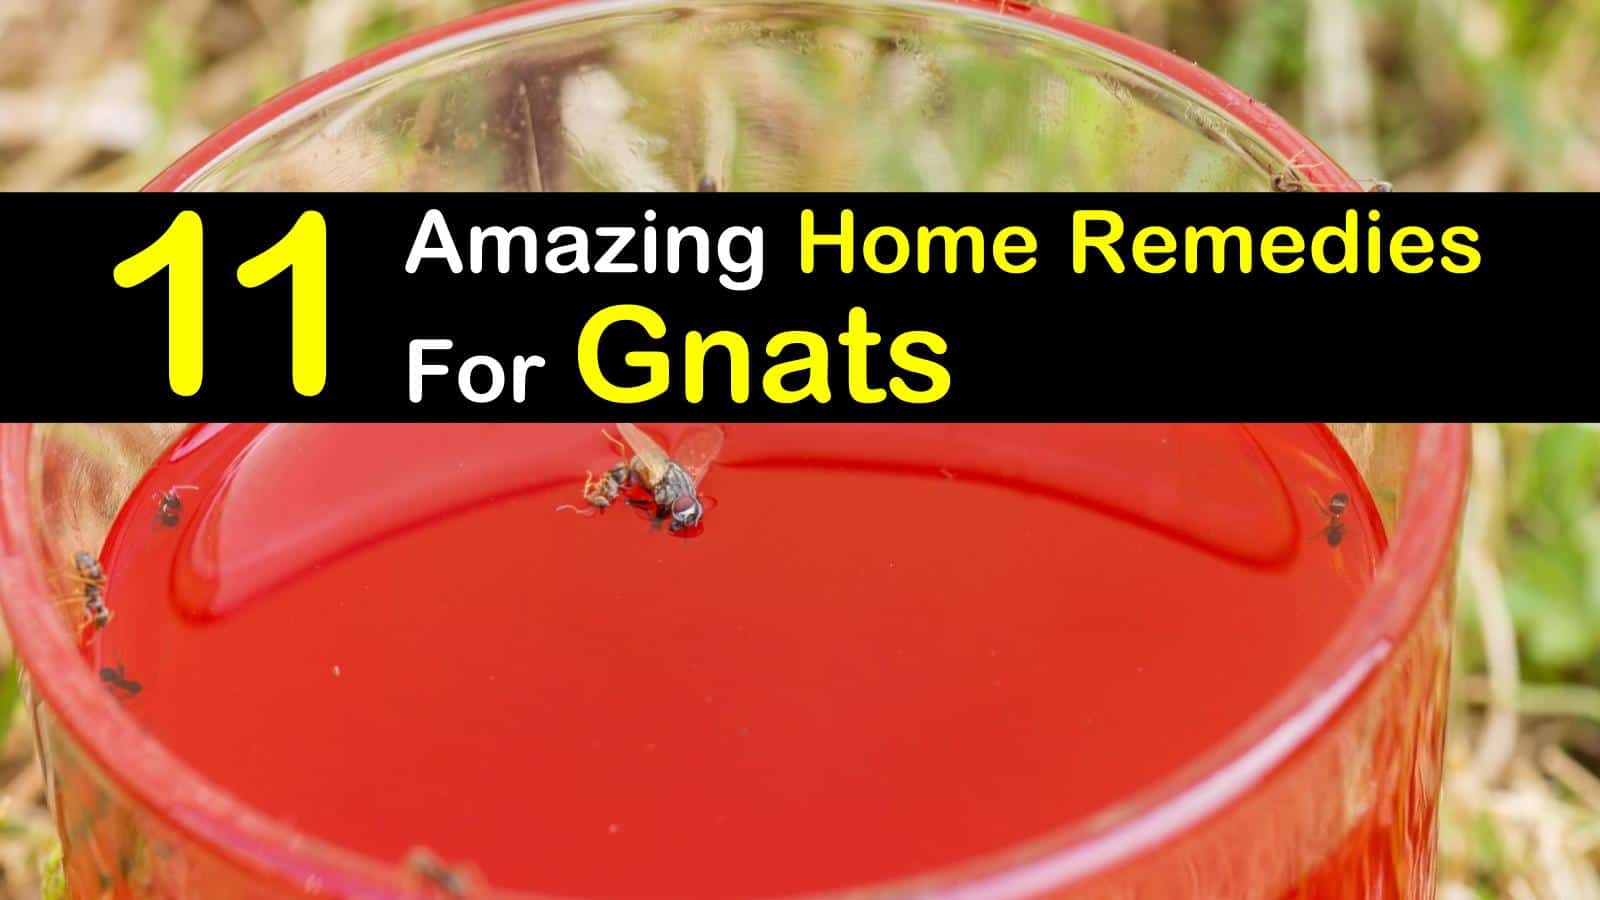 Amazing Home Remedies for Gnats titleimg1